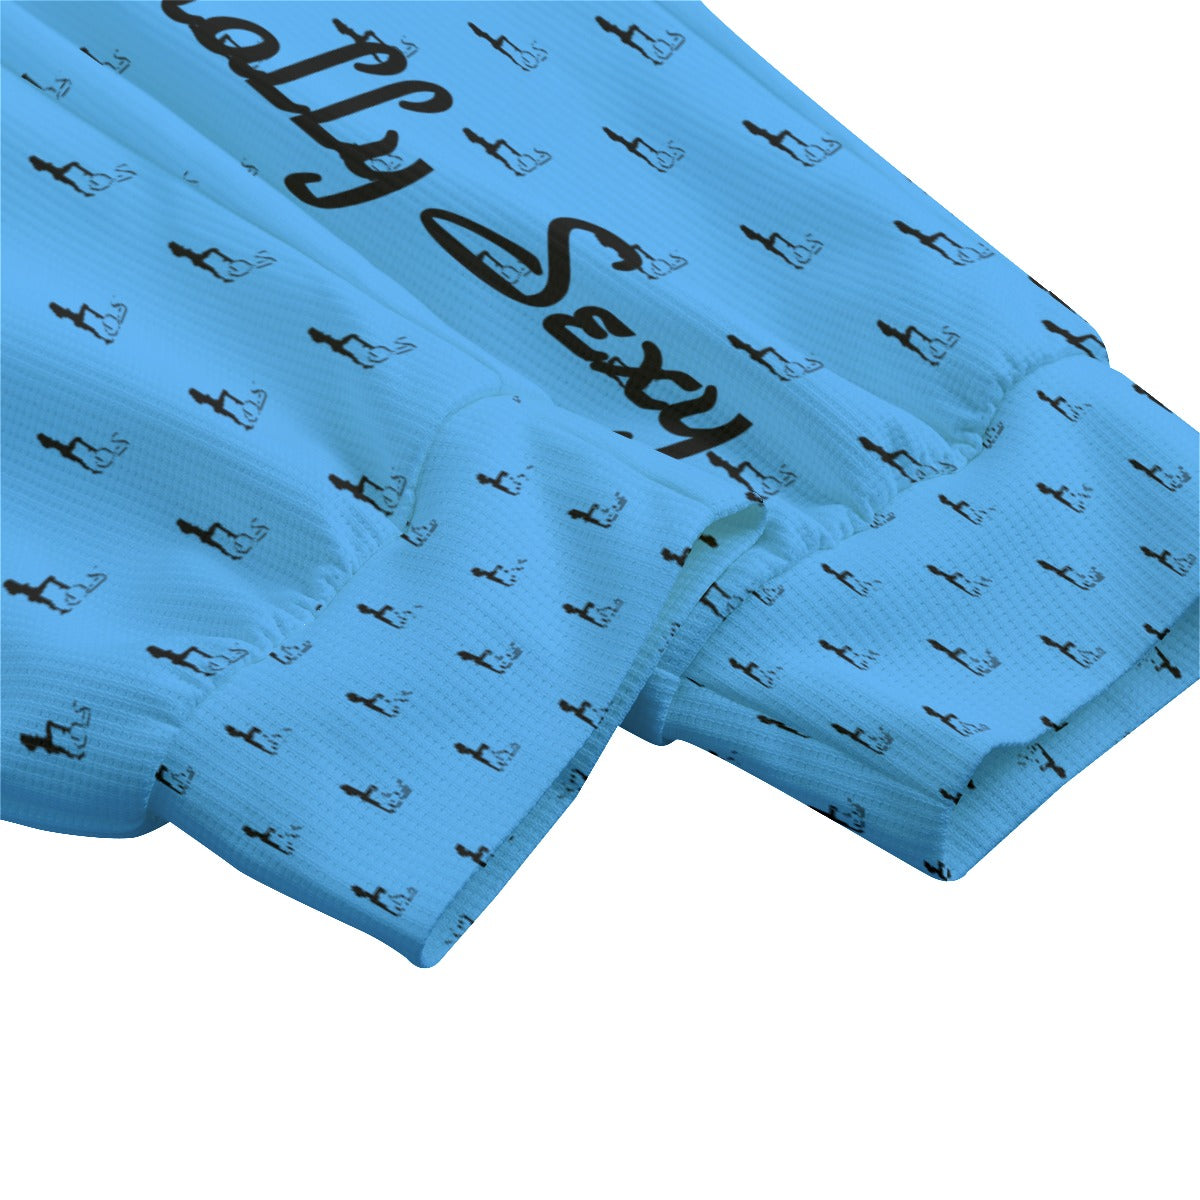 Officially Sexy Baby Blue Laser Collection Logo With Girl Women's Loose Casual Pants